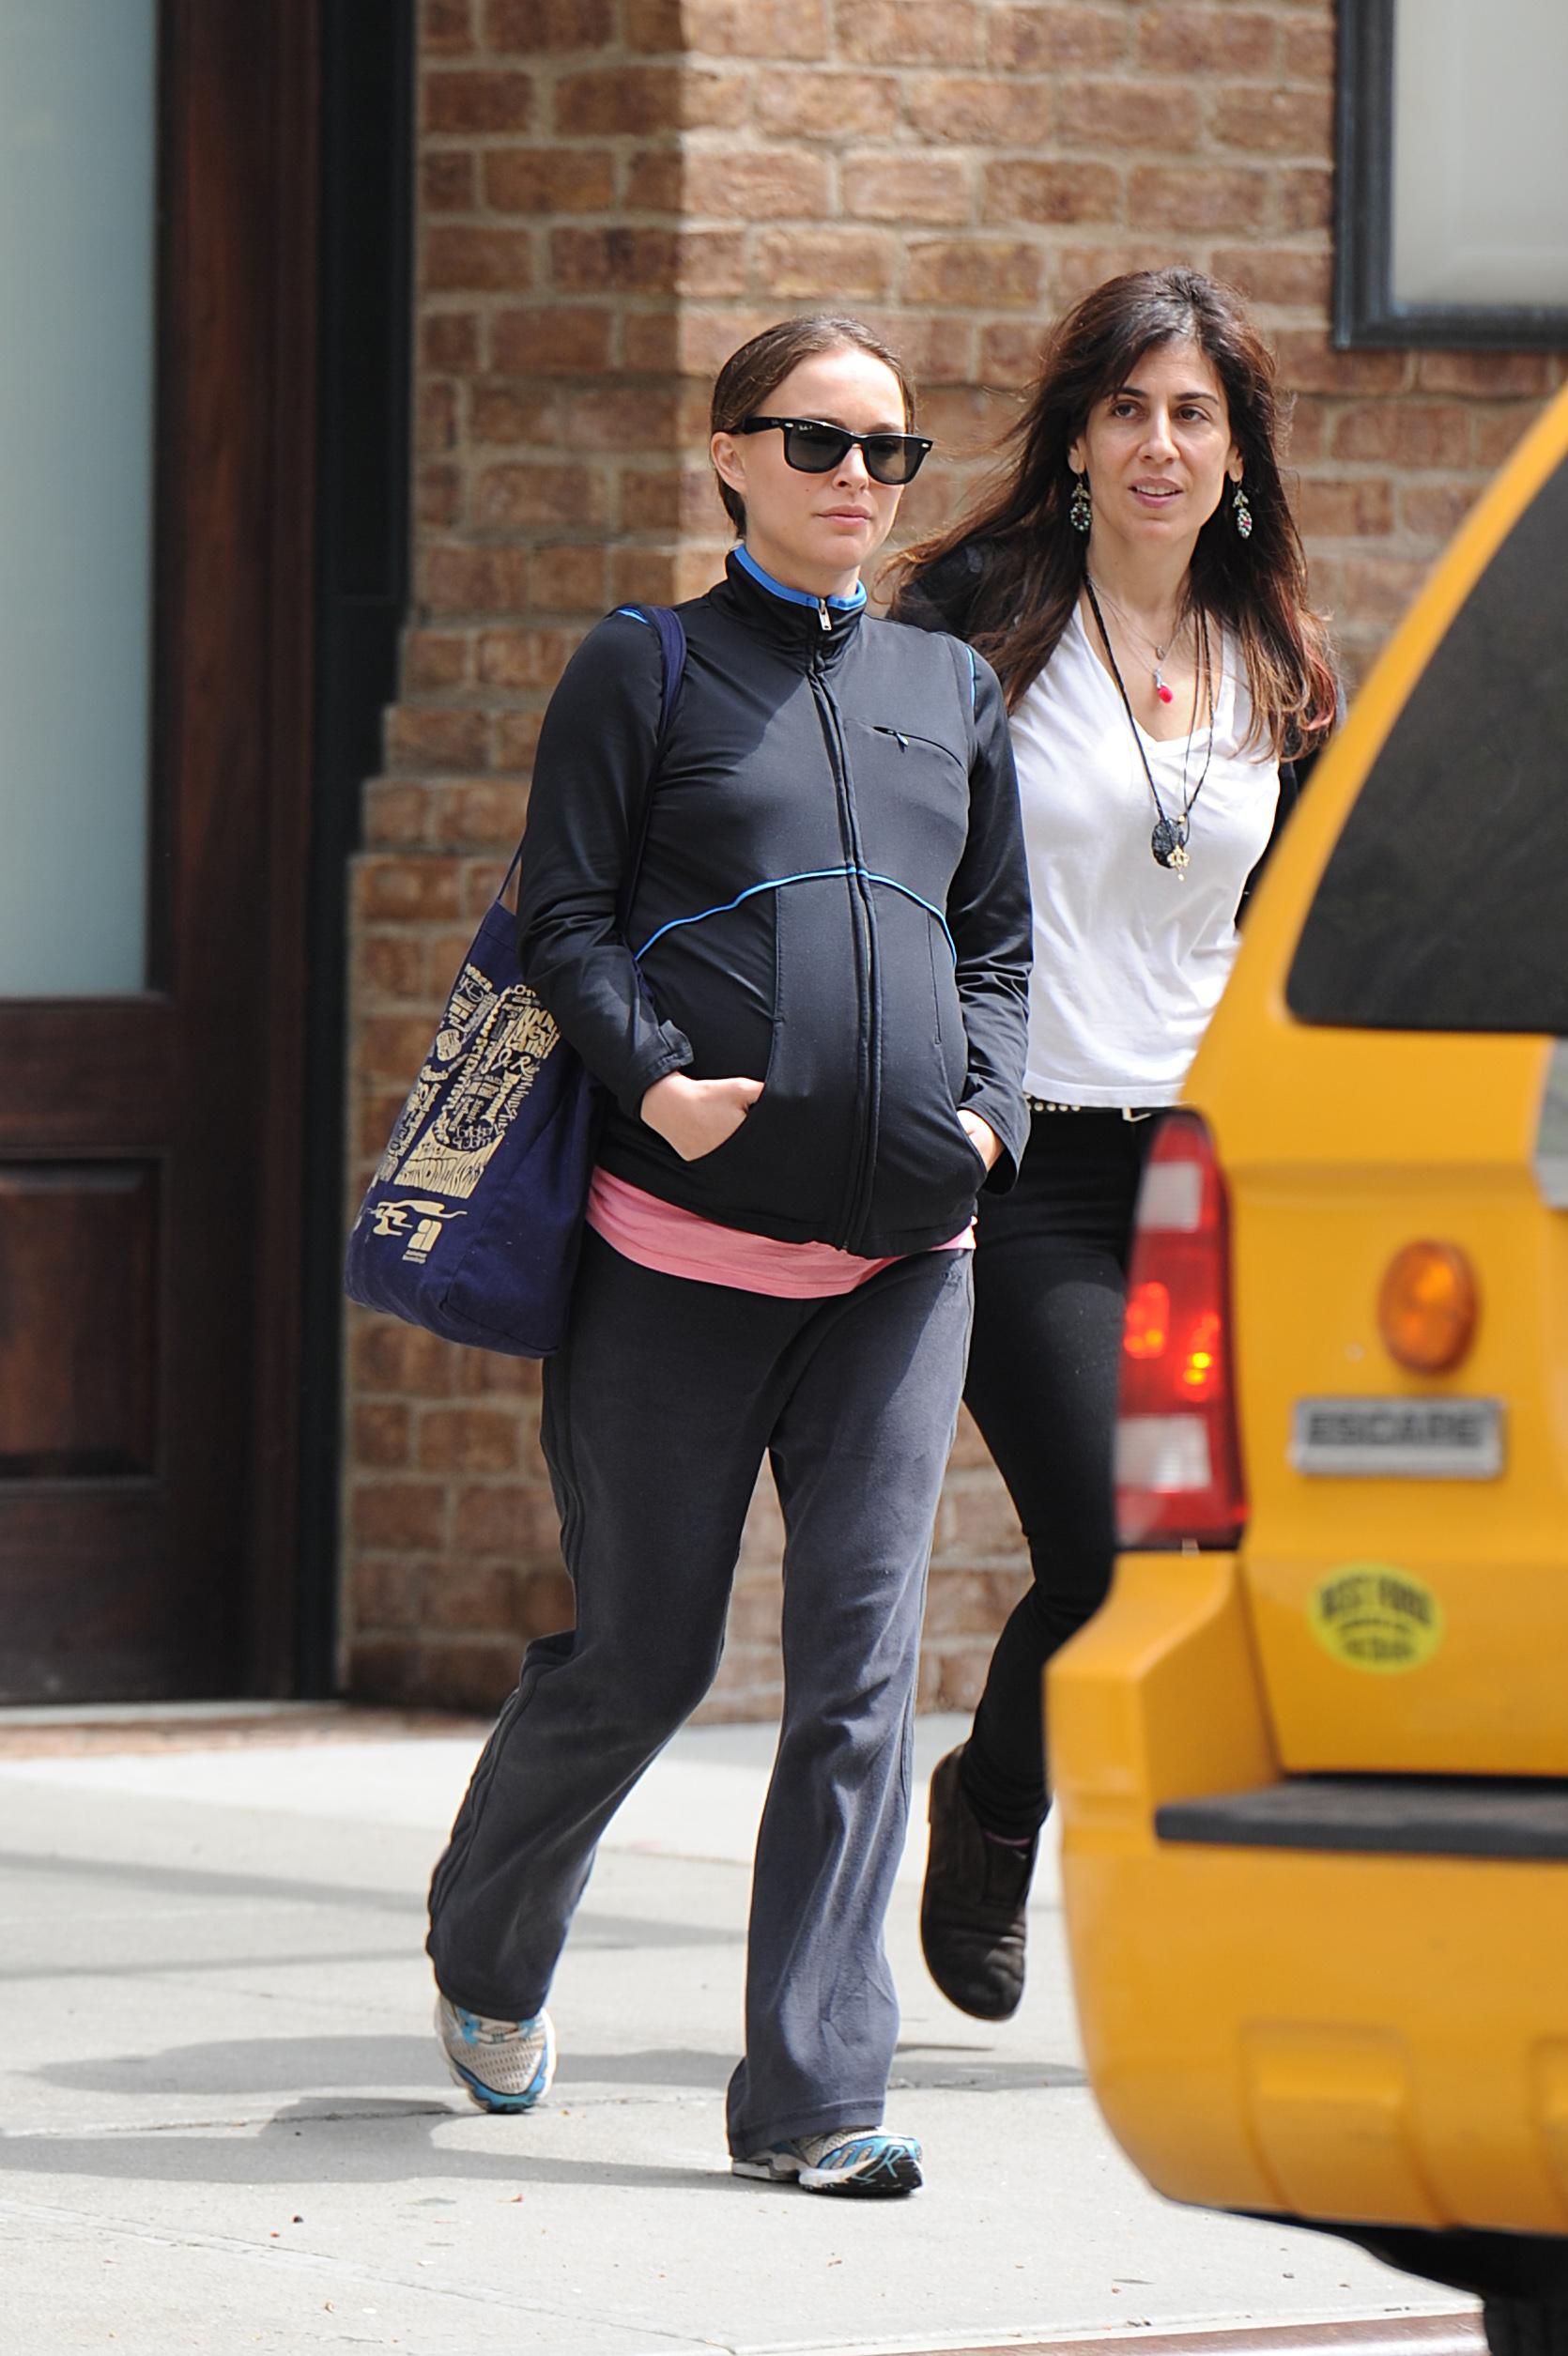 A Pregnant Natalie Portman spotted crossing the street in Tribeca, NYC